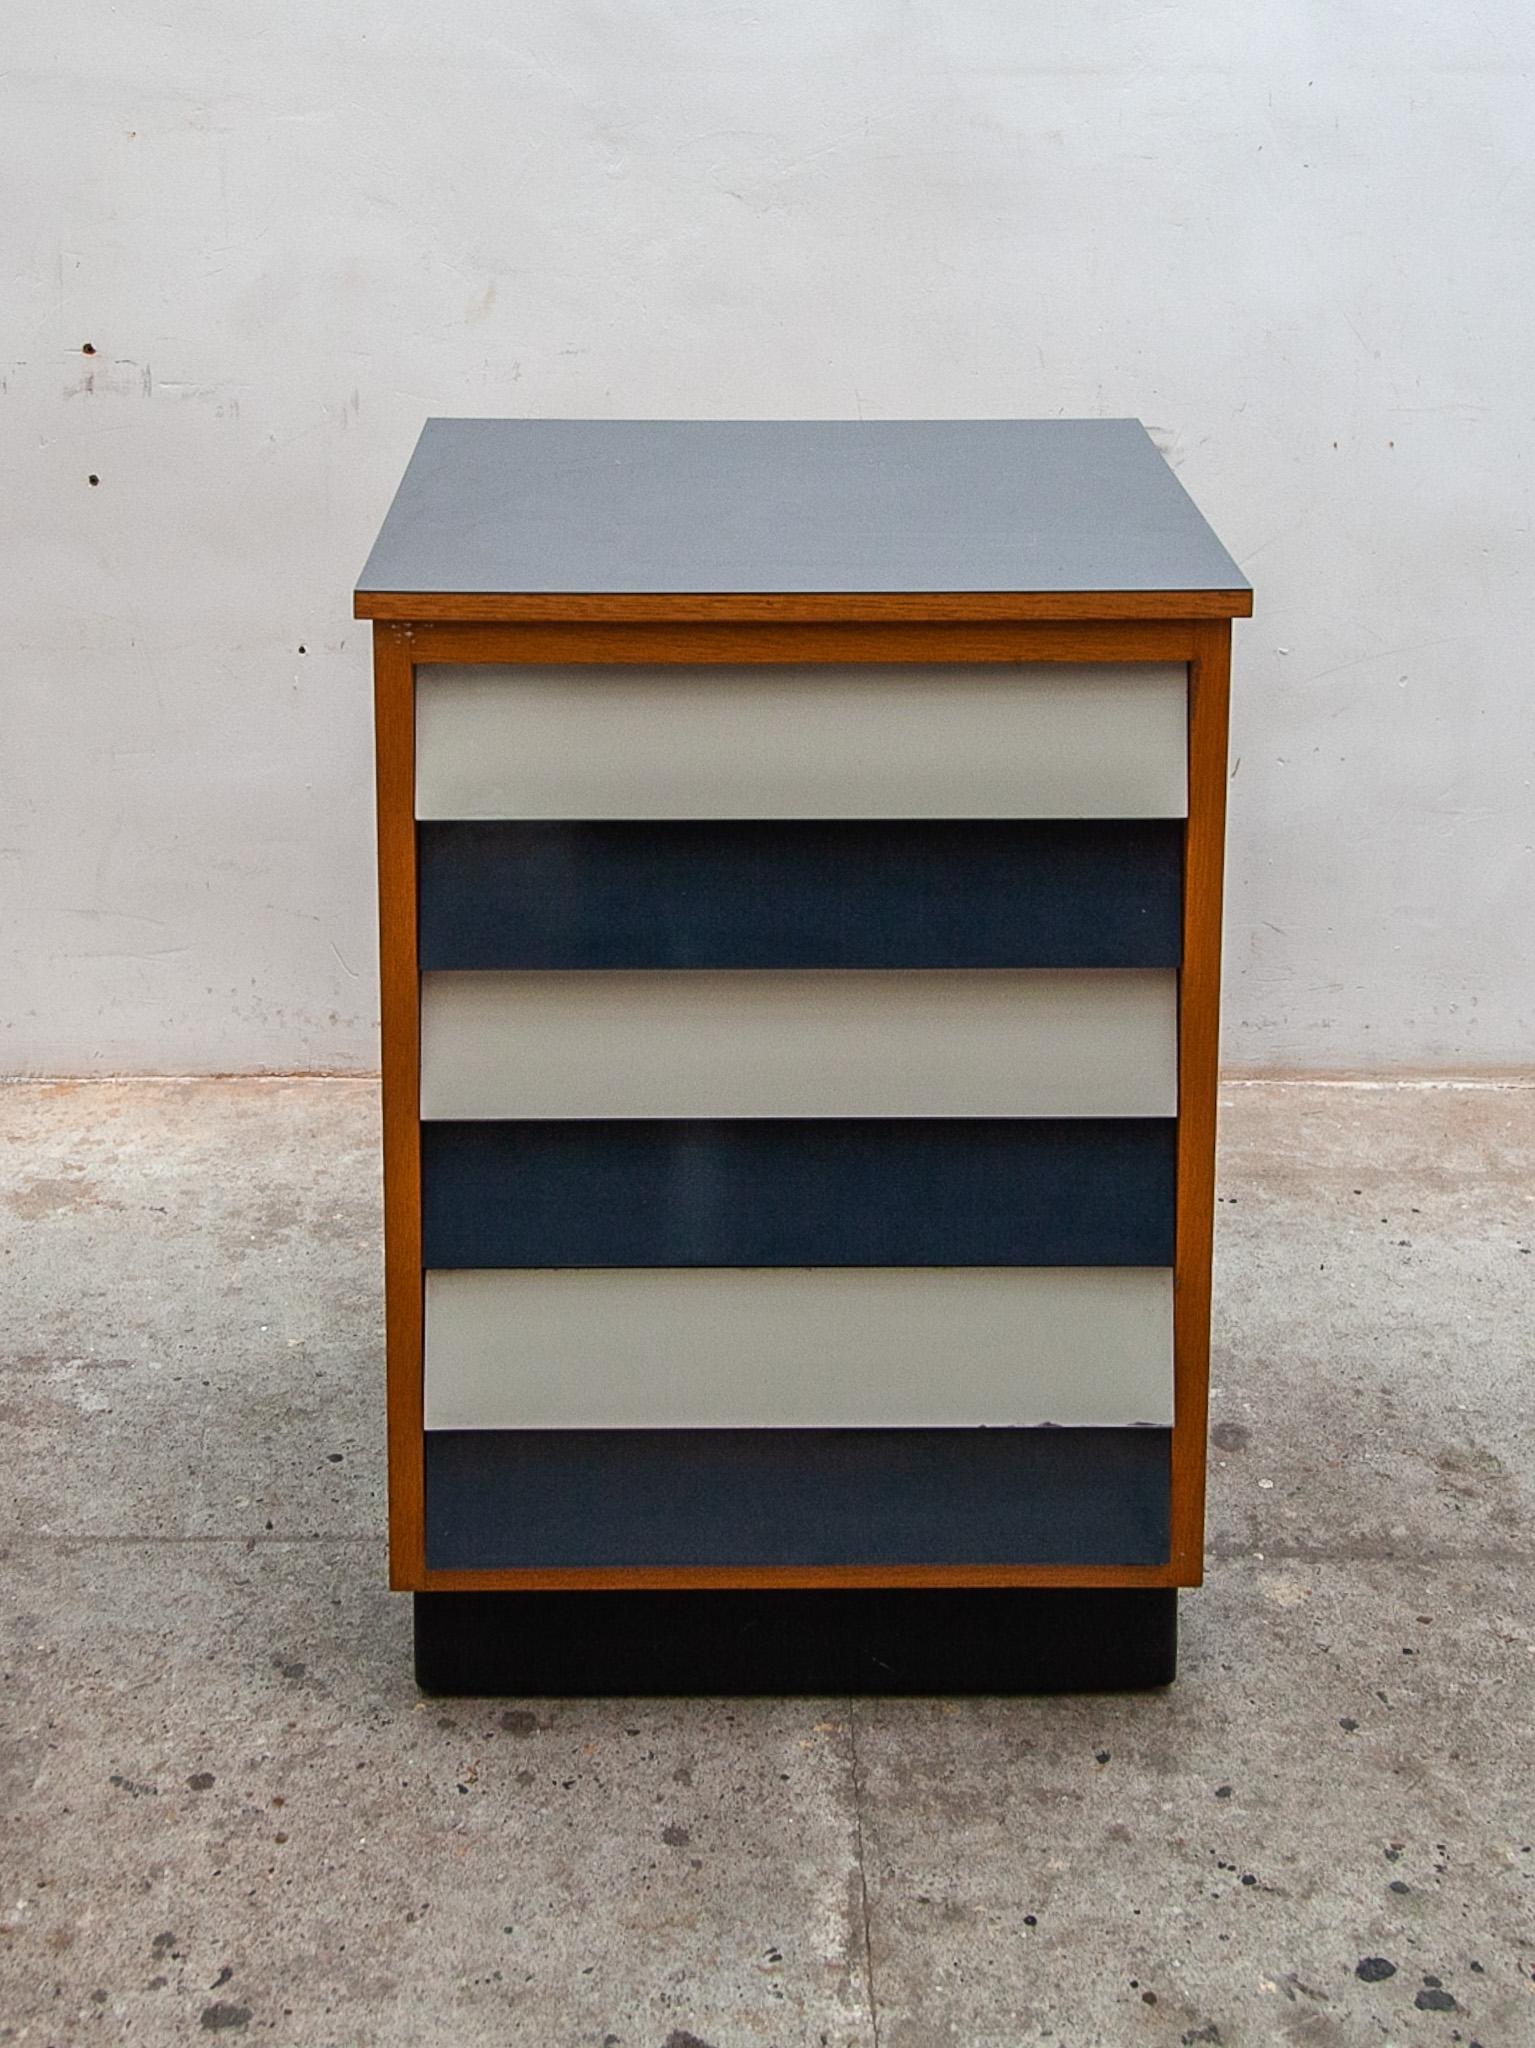 Rare industrial two tone cabinet attributed to Willy van der Meeren for Tubax, Belgium 1958. This Modernist cabinet has blue and white laminated drawers and a gray laminated top the sideboard construction is in solid beech. This typical fifties